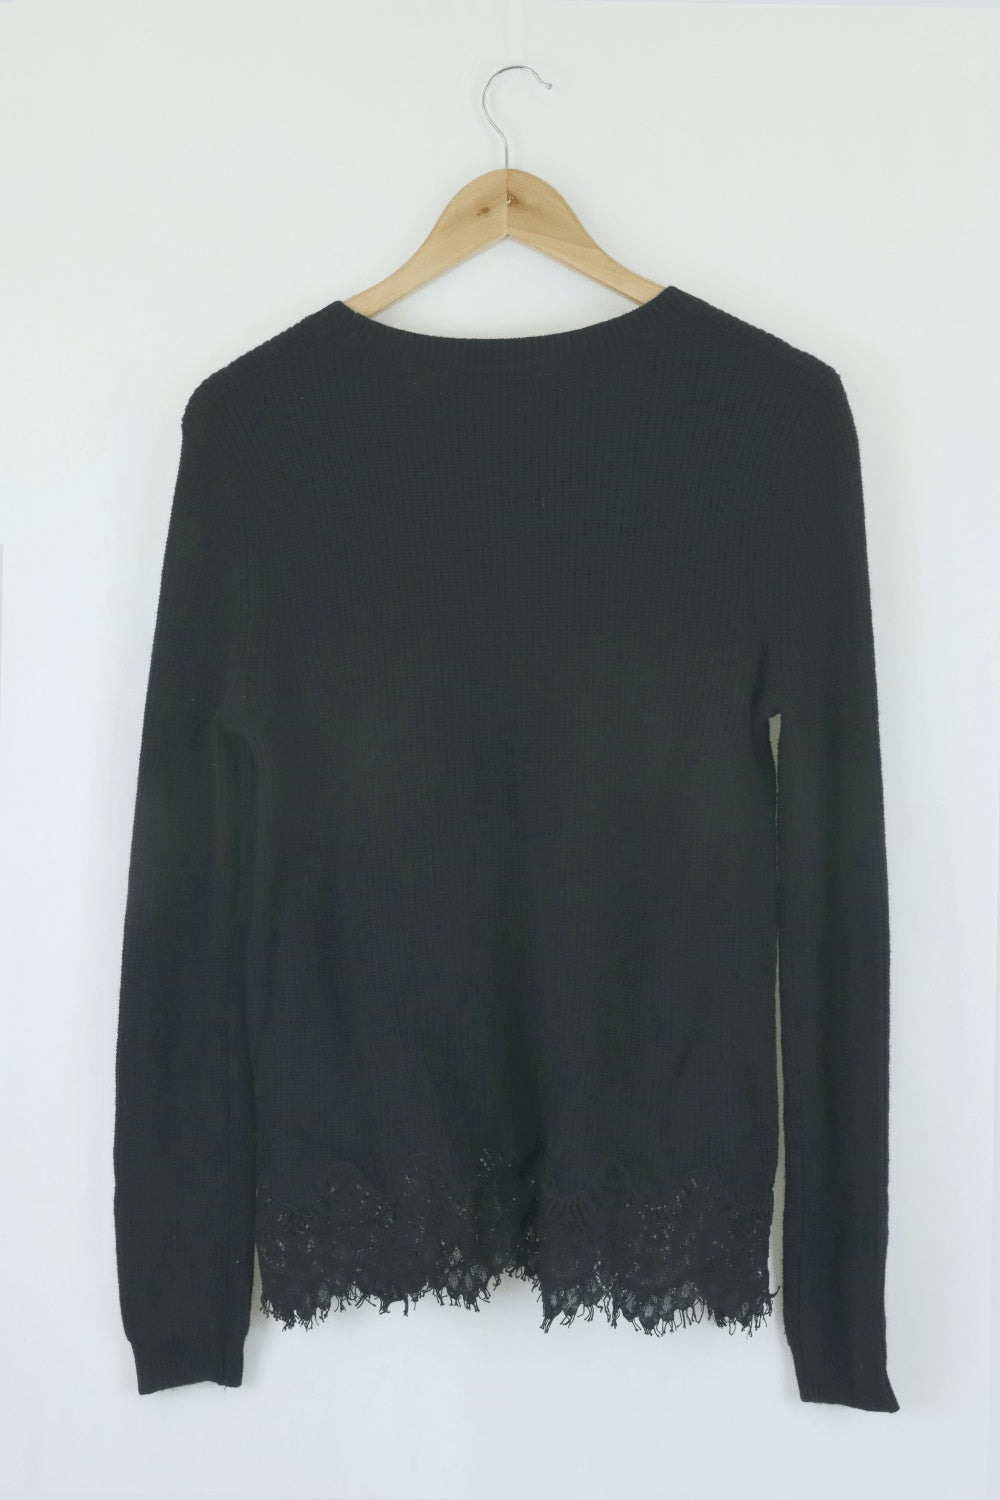 Witchery Black Knitted Jumper XS